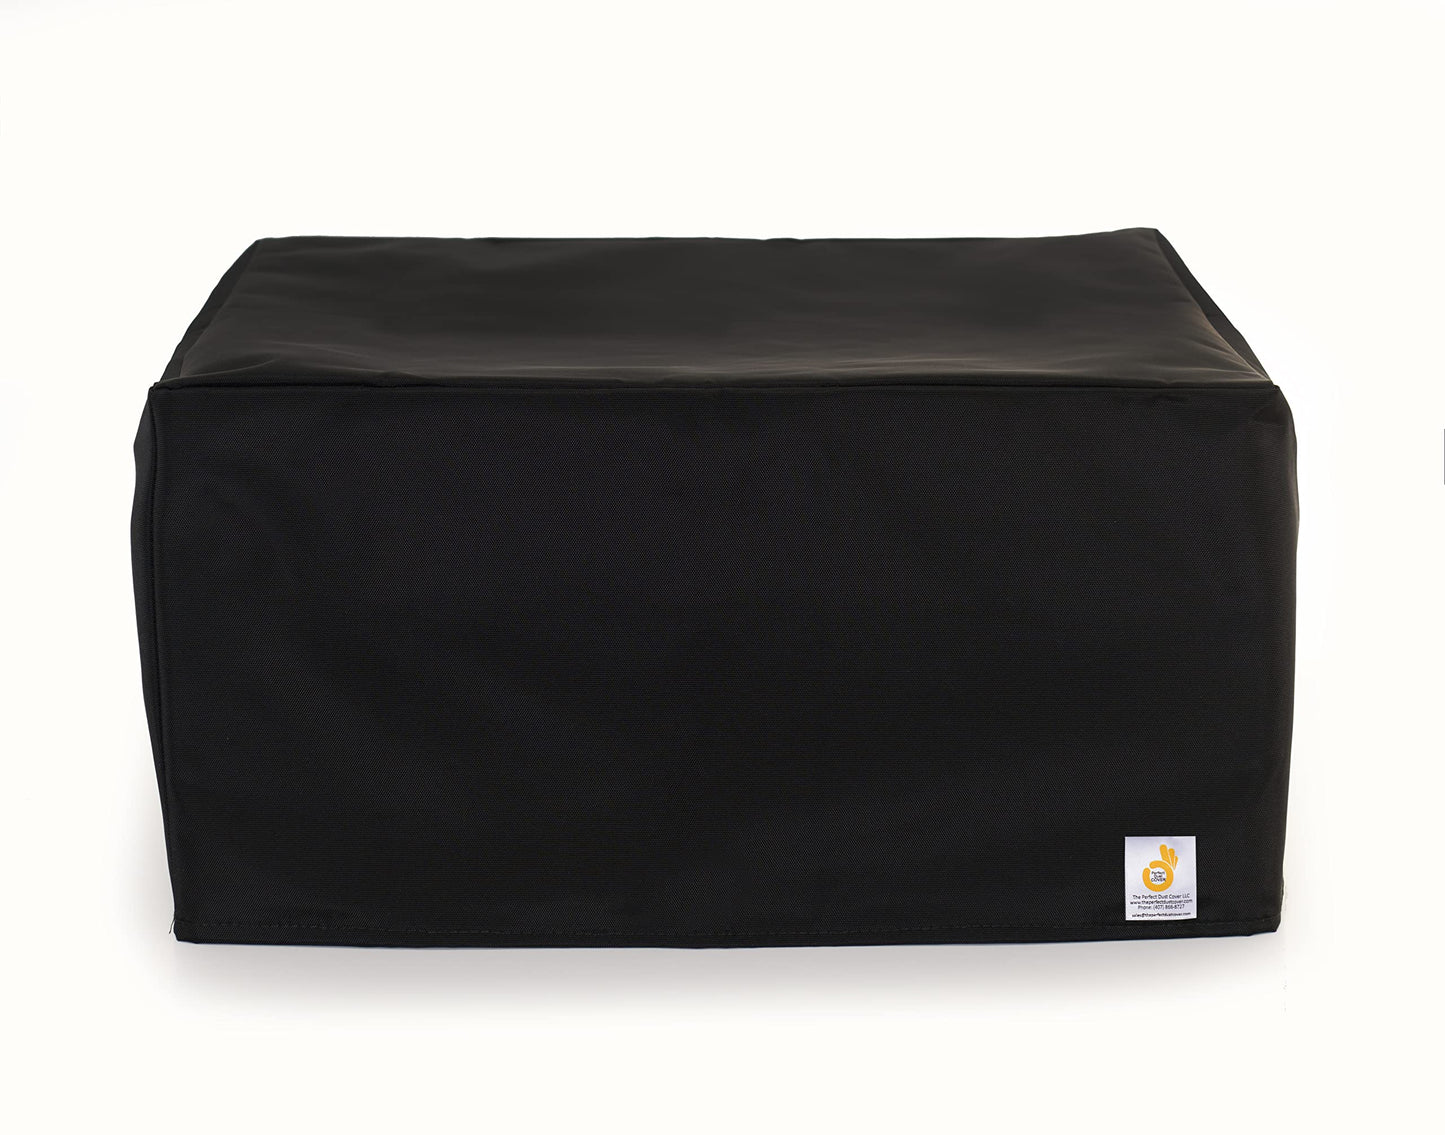 The Perfect Dust Cover, Black Nylon Cover for Canon PIXMA G4210 All MegaTank Inkjet Printer, Anti Static Double Stitched and Waterproof by The Perfect Dust Cover LLC